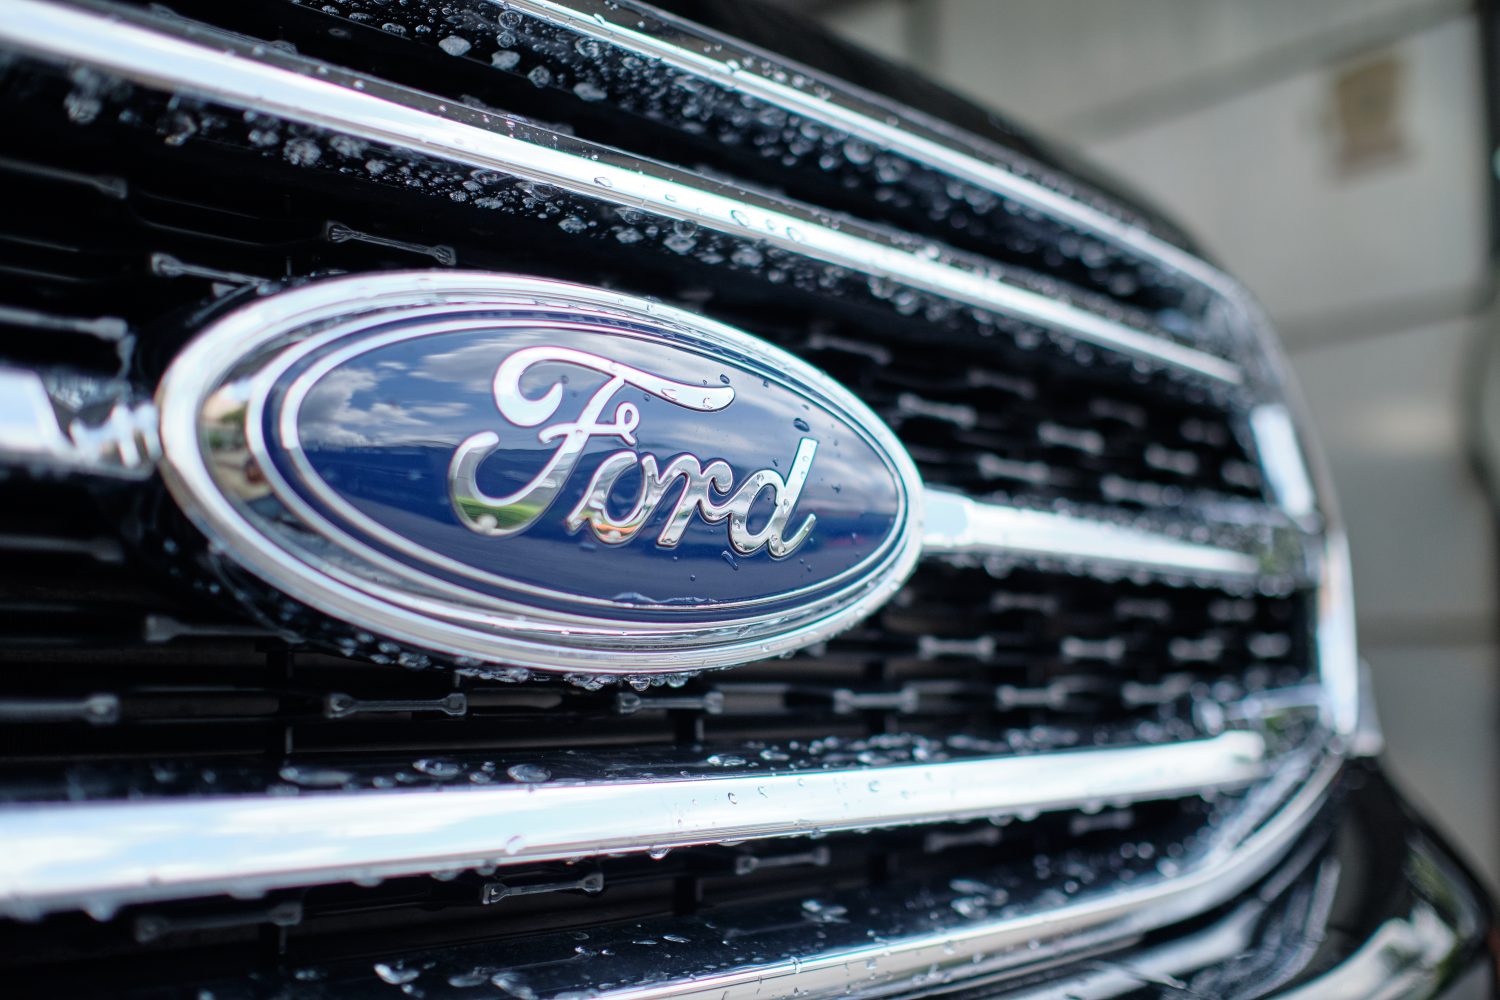 The Shops, a new e-commerce system is being launched by FordDirect in a joint venture between the automaker and its dealers.